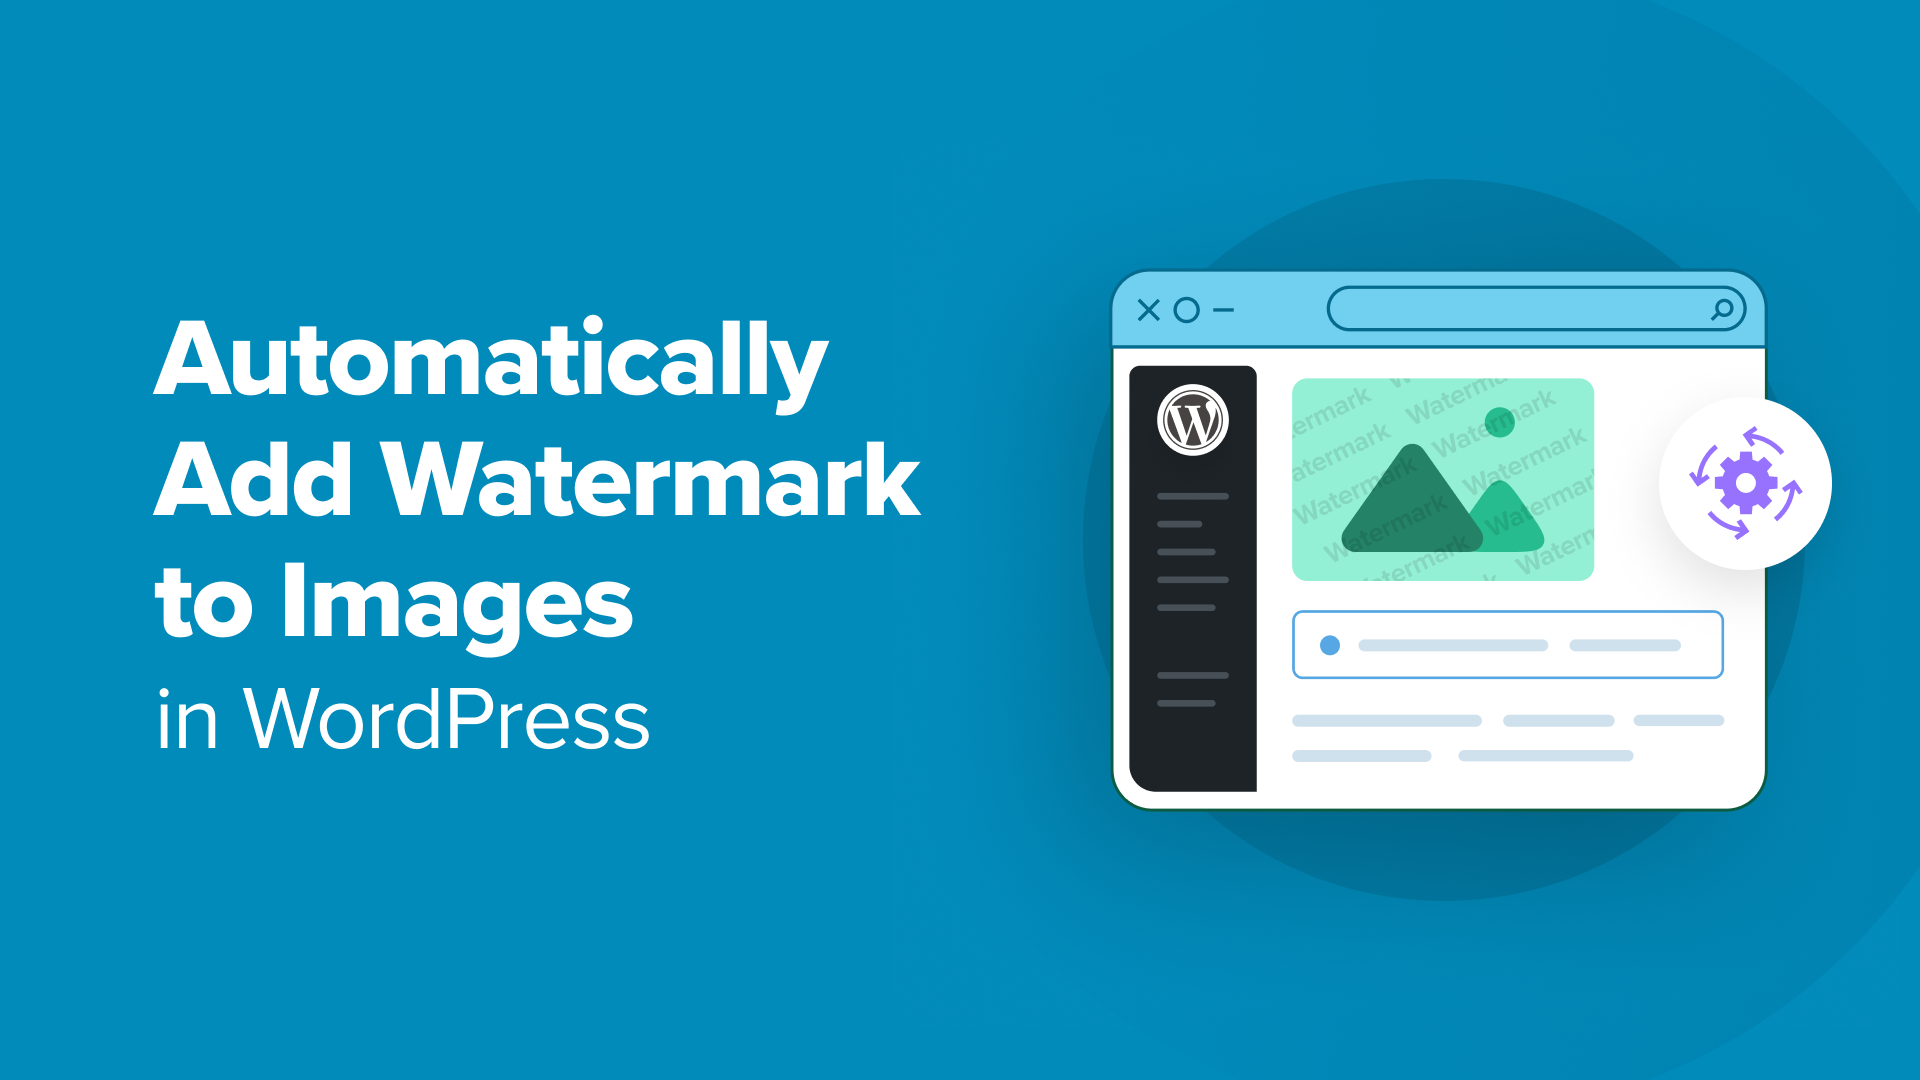 How to Automatically Add Watermark to Images in WordPress